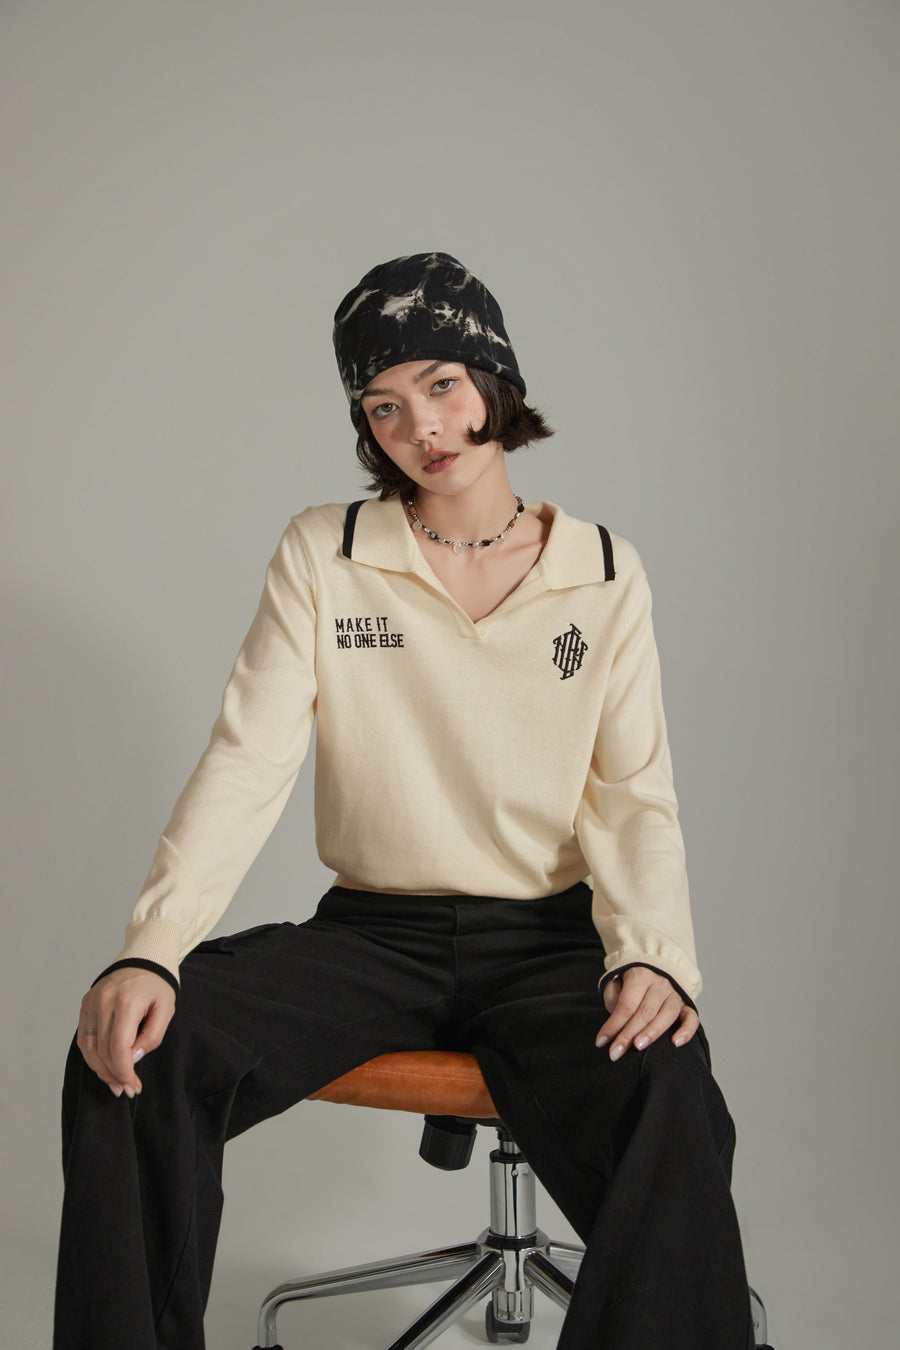 CHUU Lettering Open Collar Knit Sweater